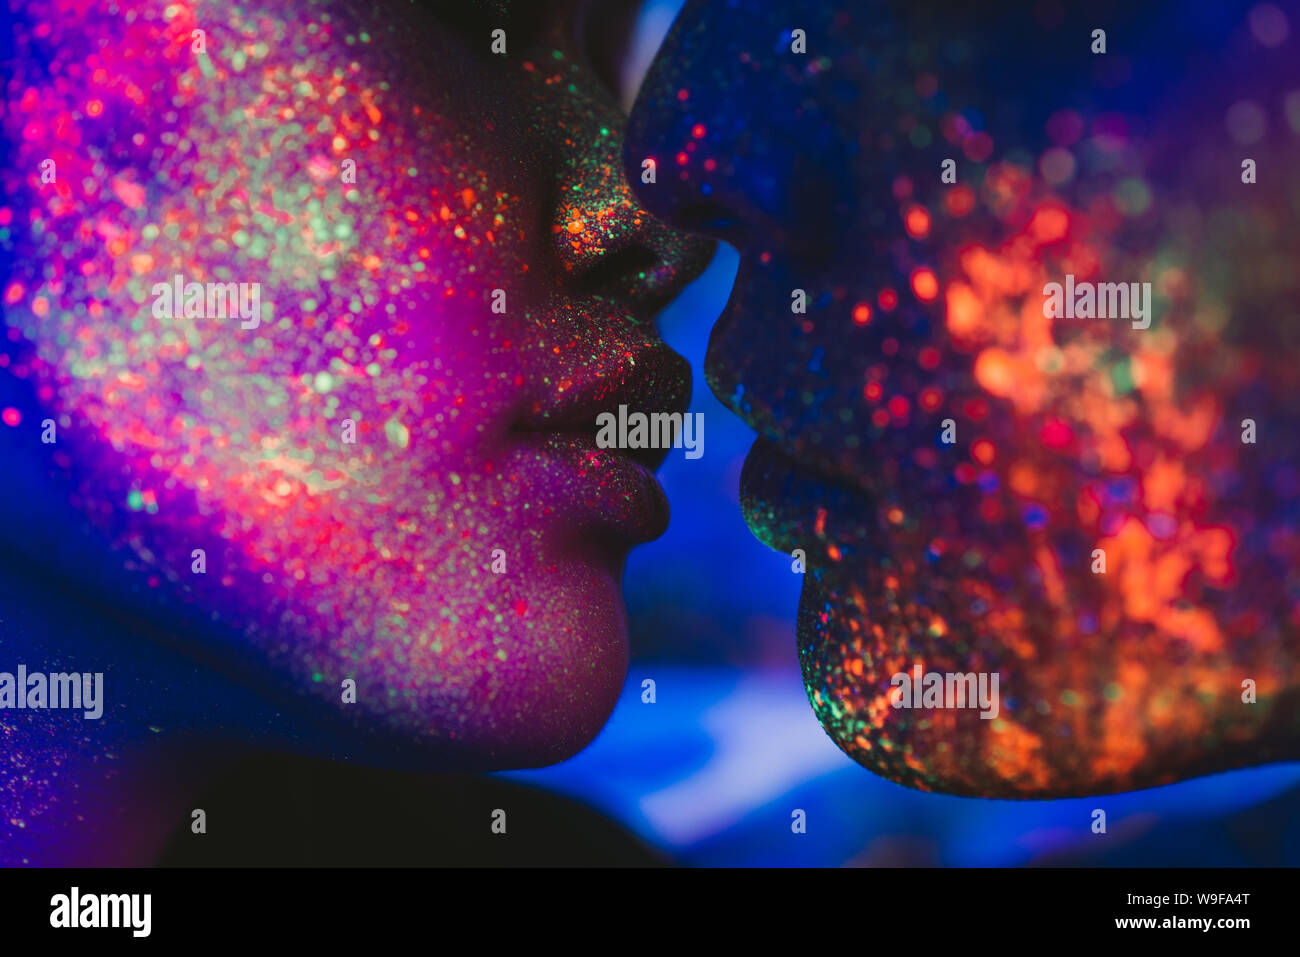 Couple kissing in the disco club with fluorescent paintings on the faces Stock Photo